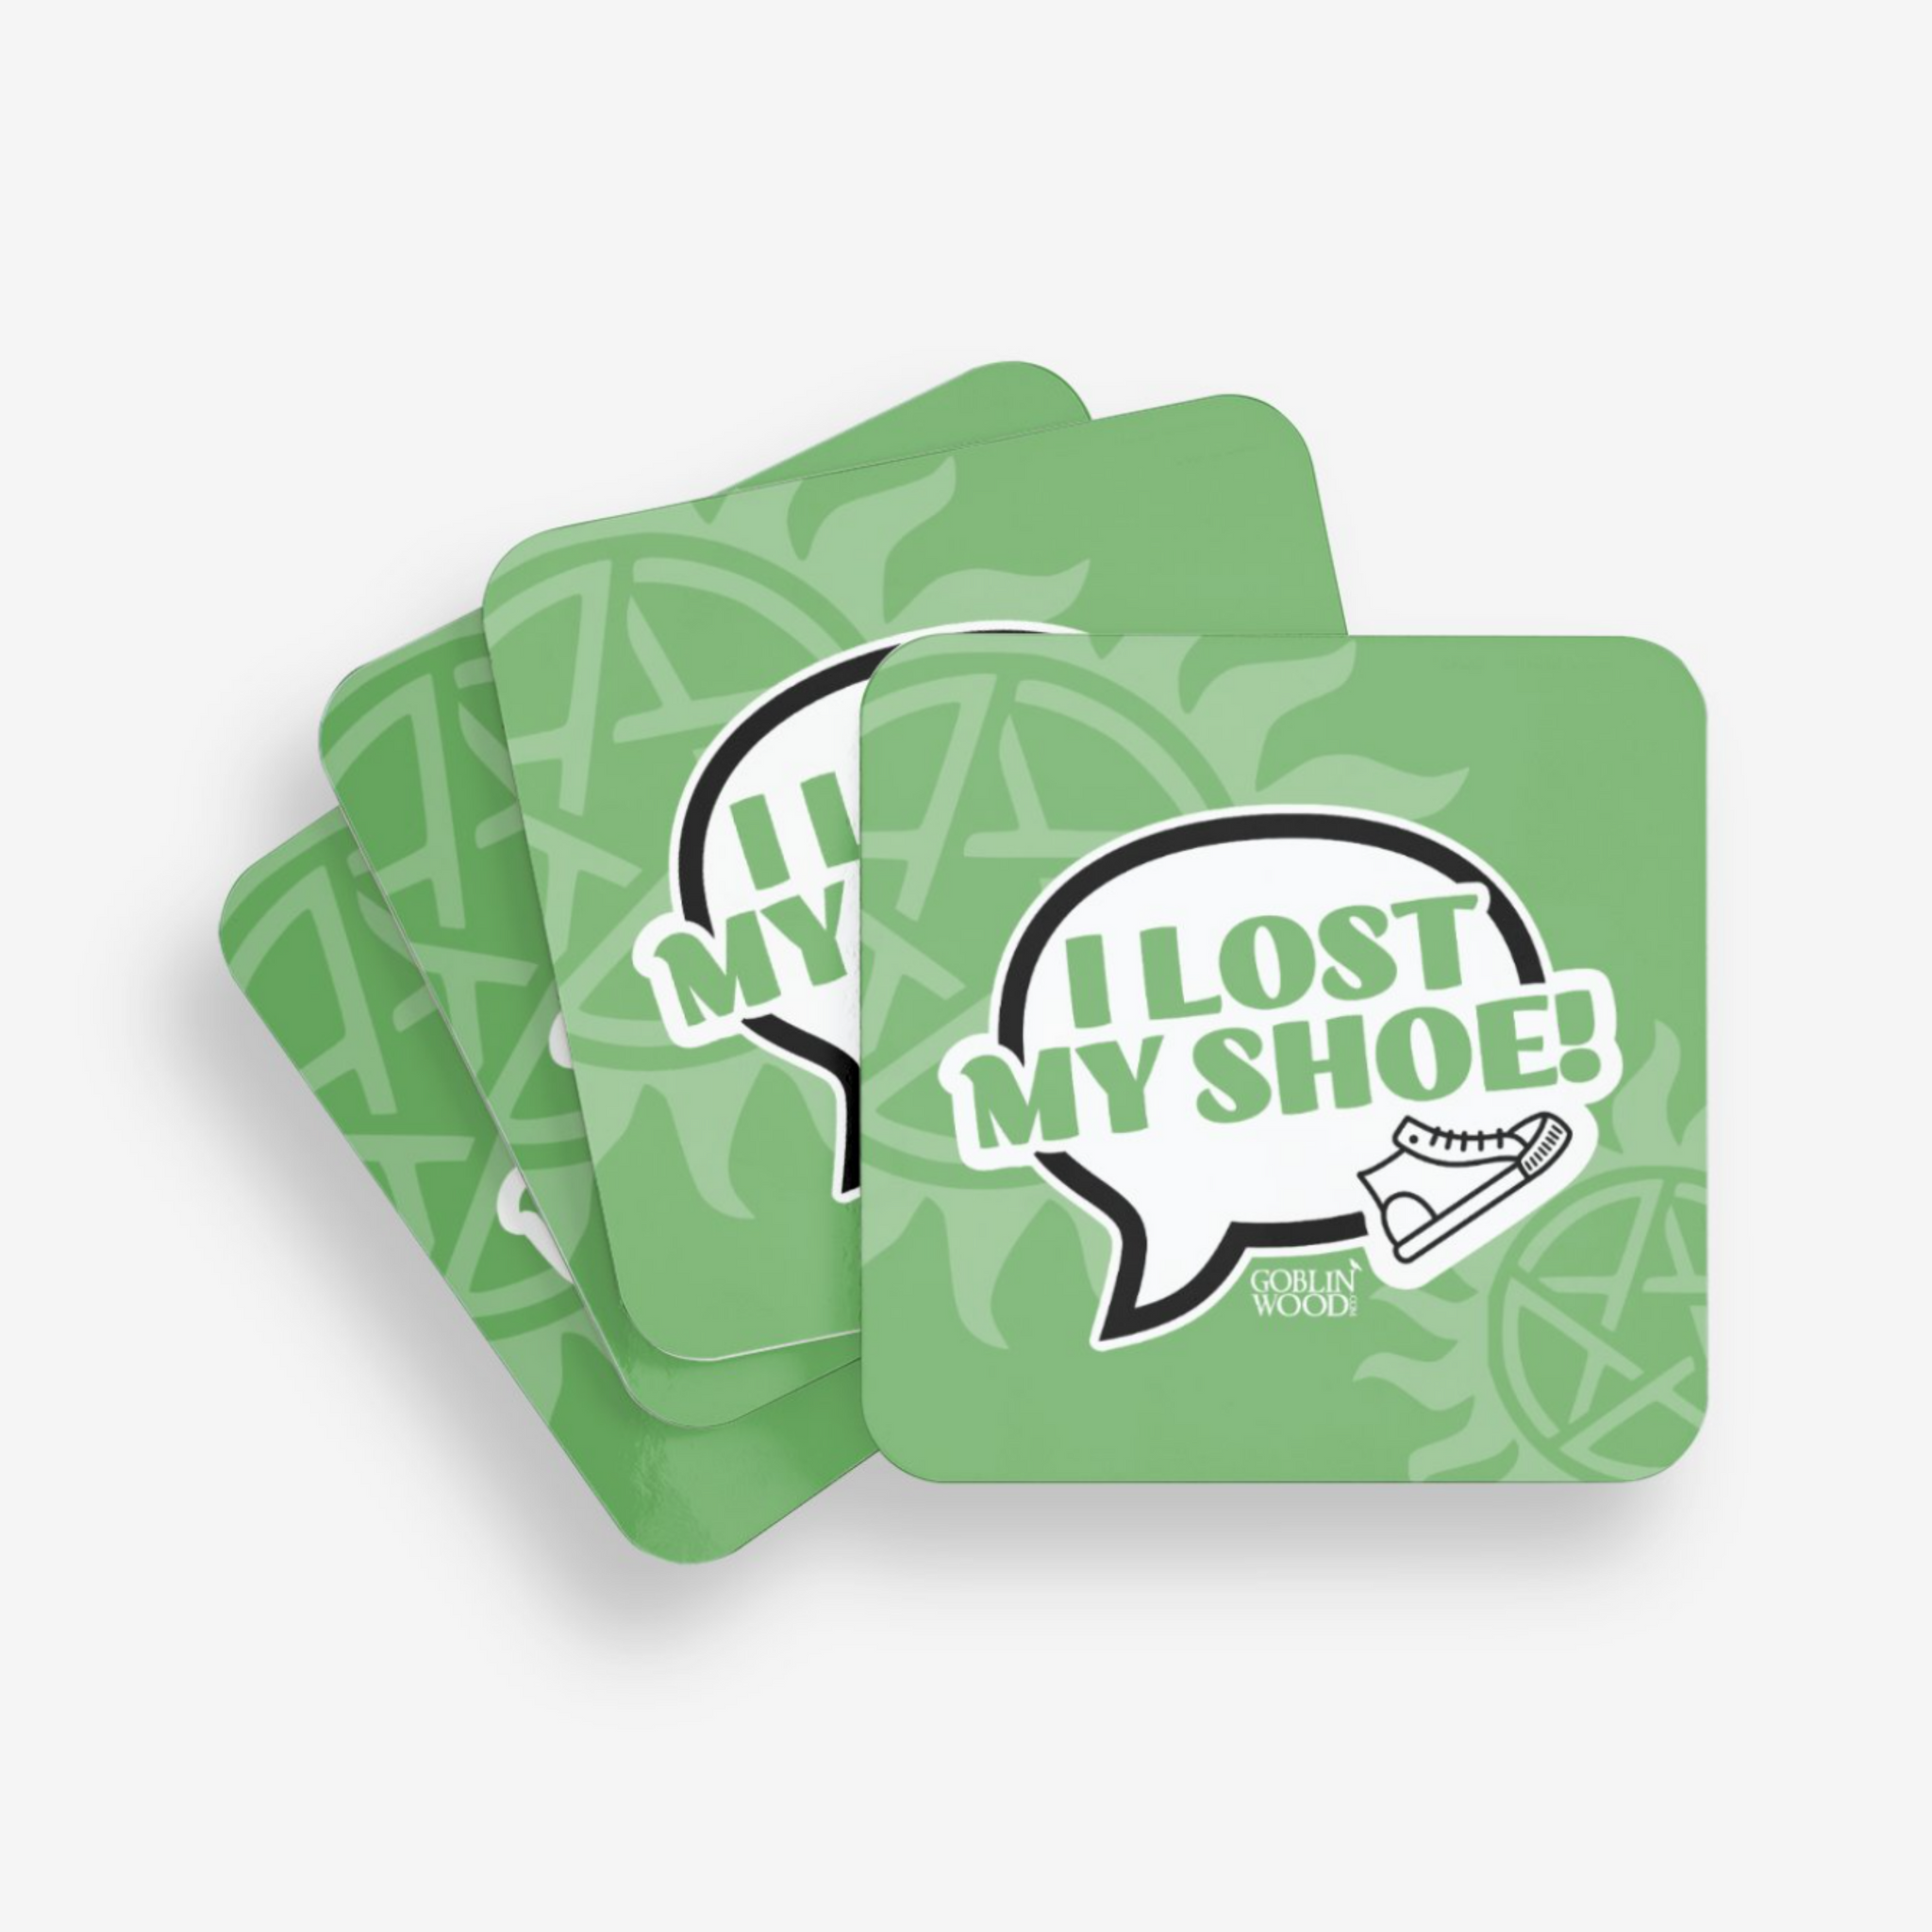 I Lost My Shoe! Speech Bubble Coaster - Supernatural inspired